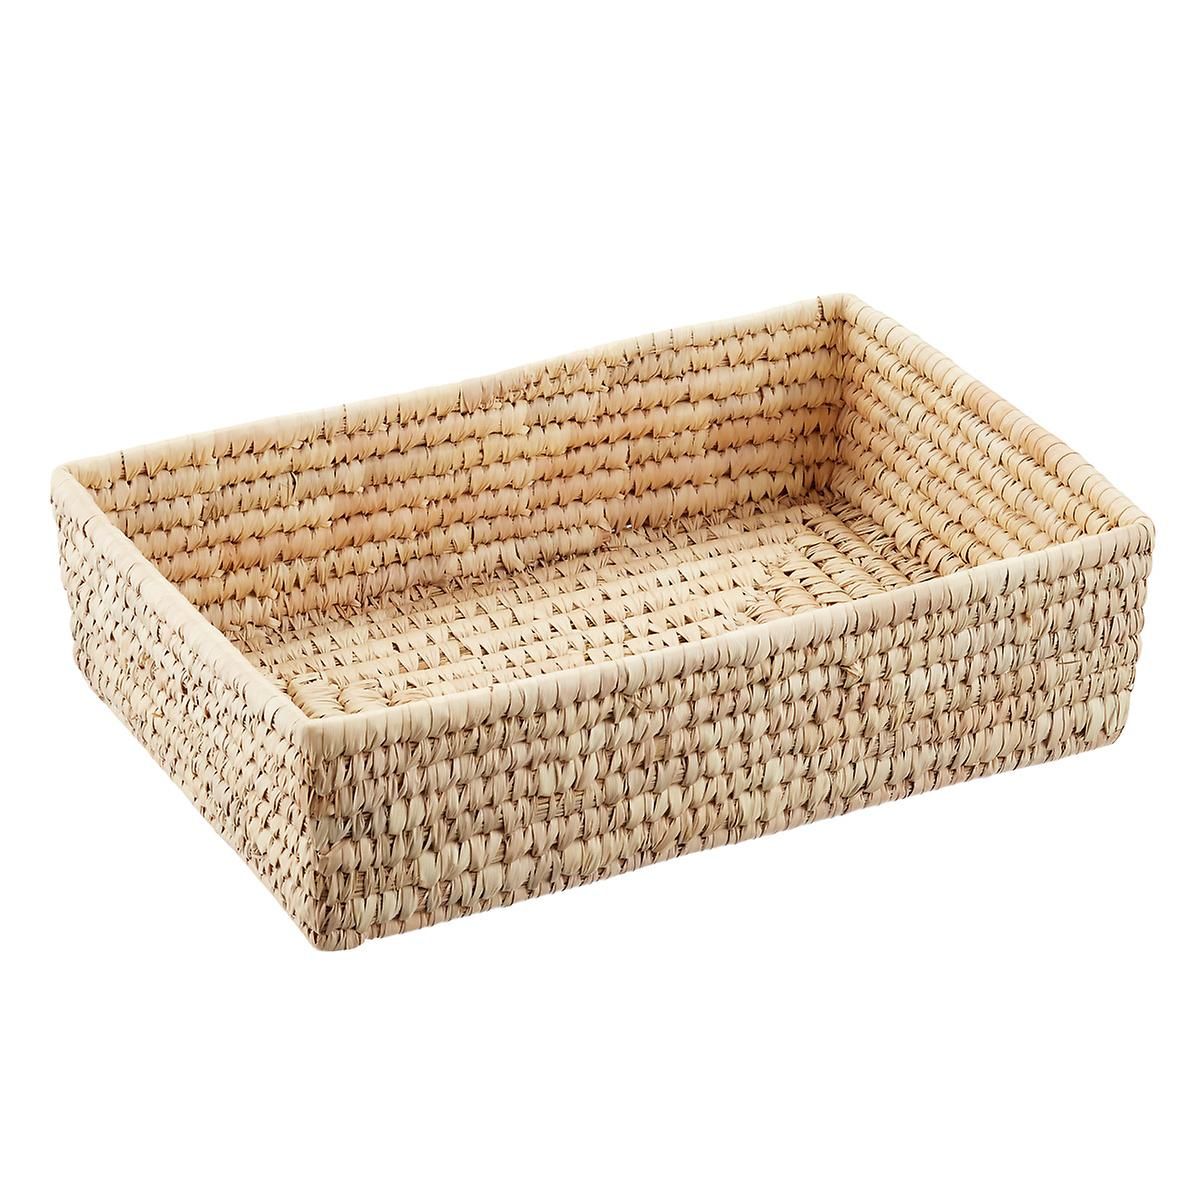 Hand-Woven Palm Leaf Tray | The Container Store